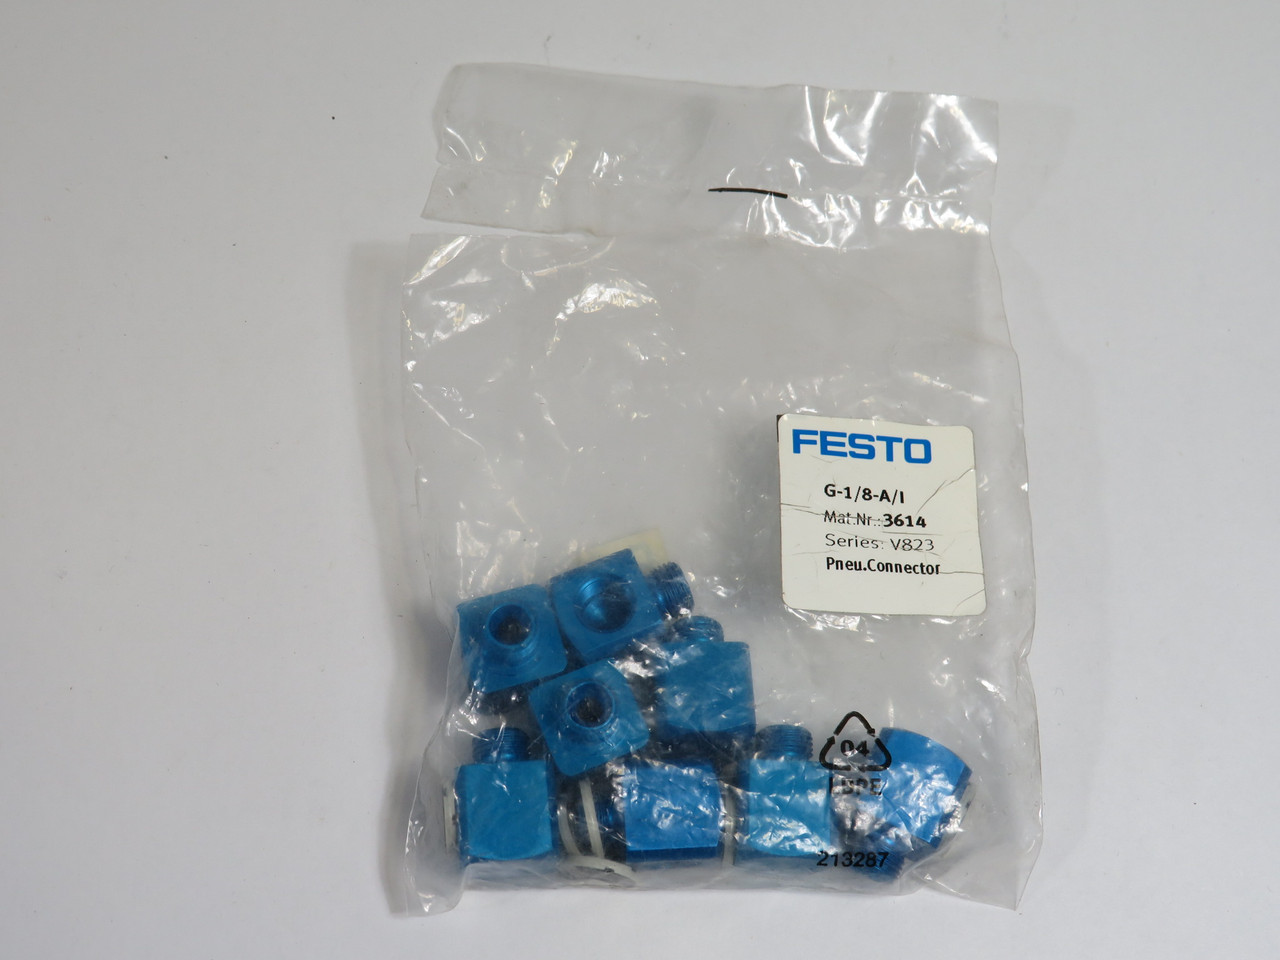 Festo 3614 G-1/8-A/I Elbow with Sealing Ring 8-Pack ! NWB !